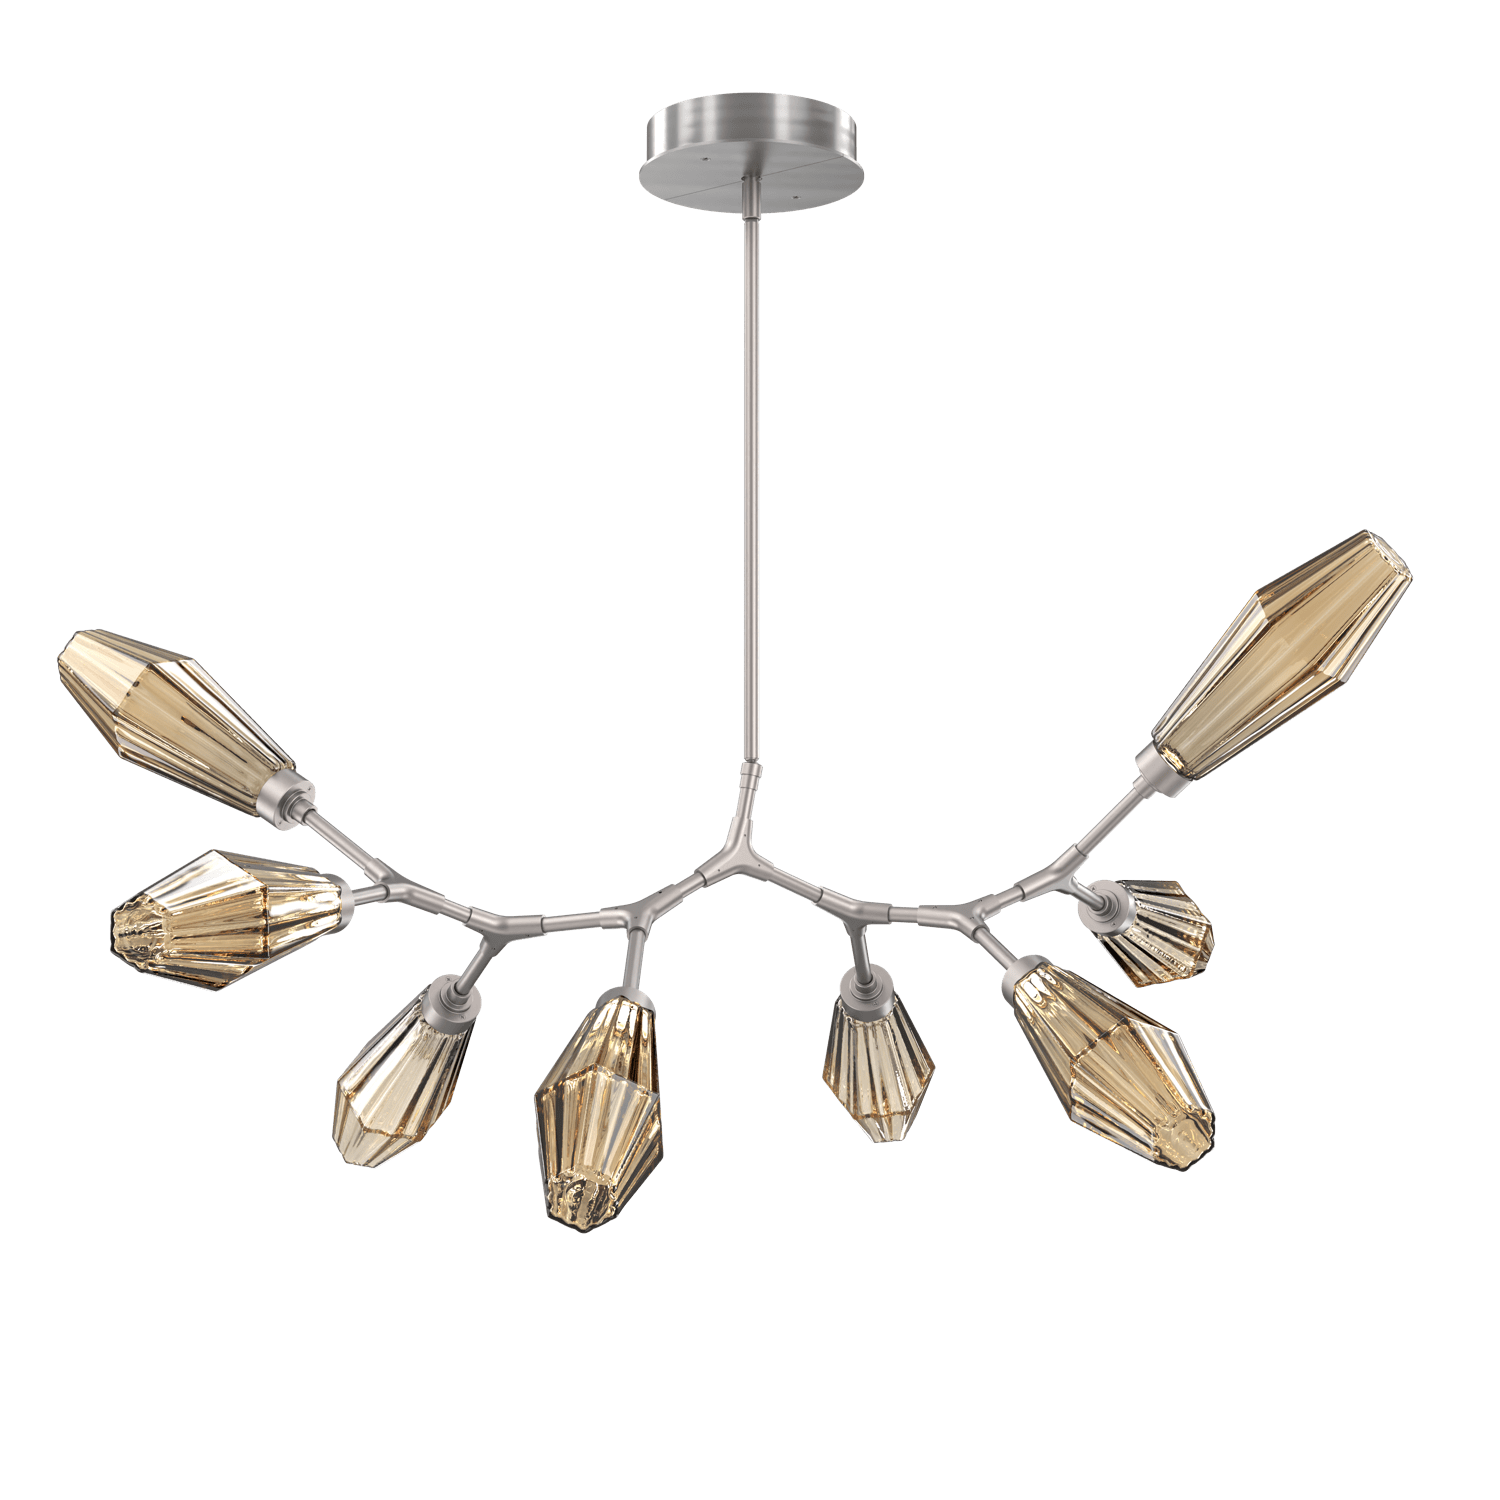 PLB0049-BB-SN-RB-Hammerton-Studio-Aalto-8-light-modern-branch-chandelier-with-satin-nickel-finish-and-optic-ribbed-bronze-glass-shades-and-LED-lamping